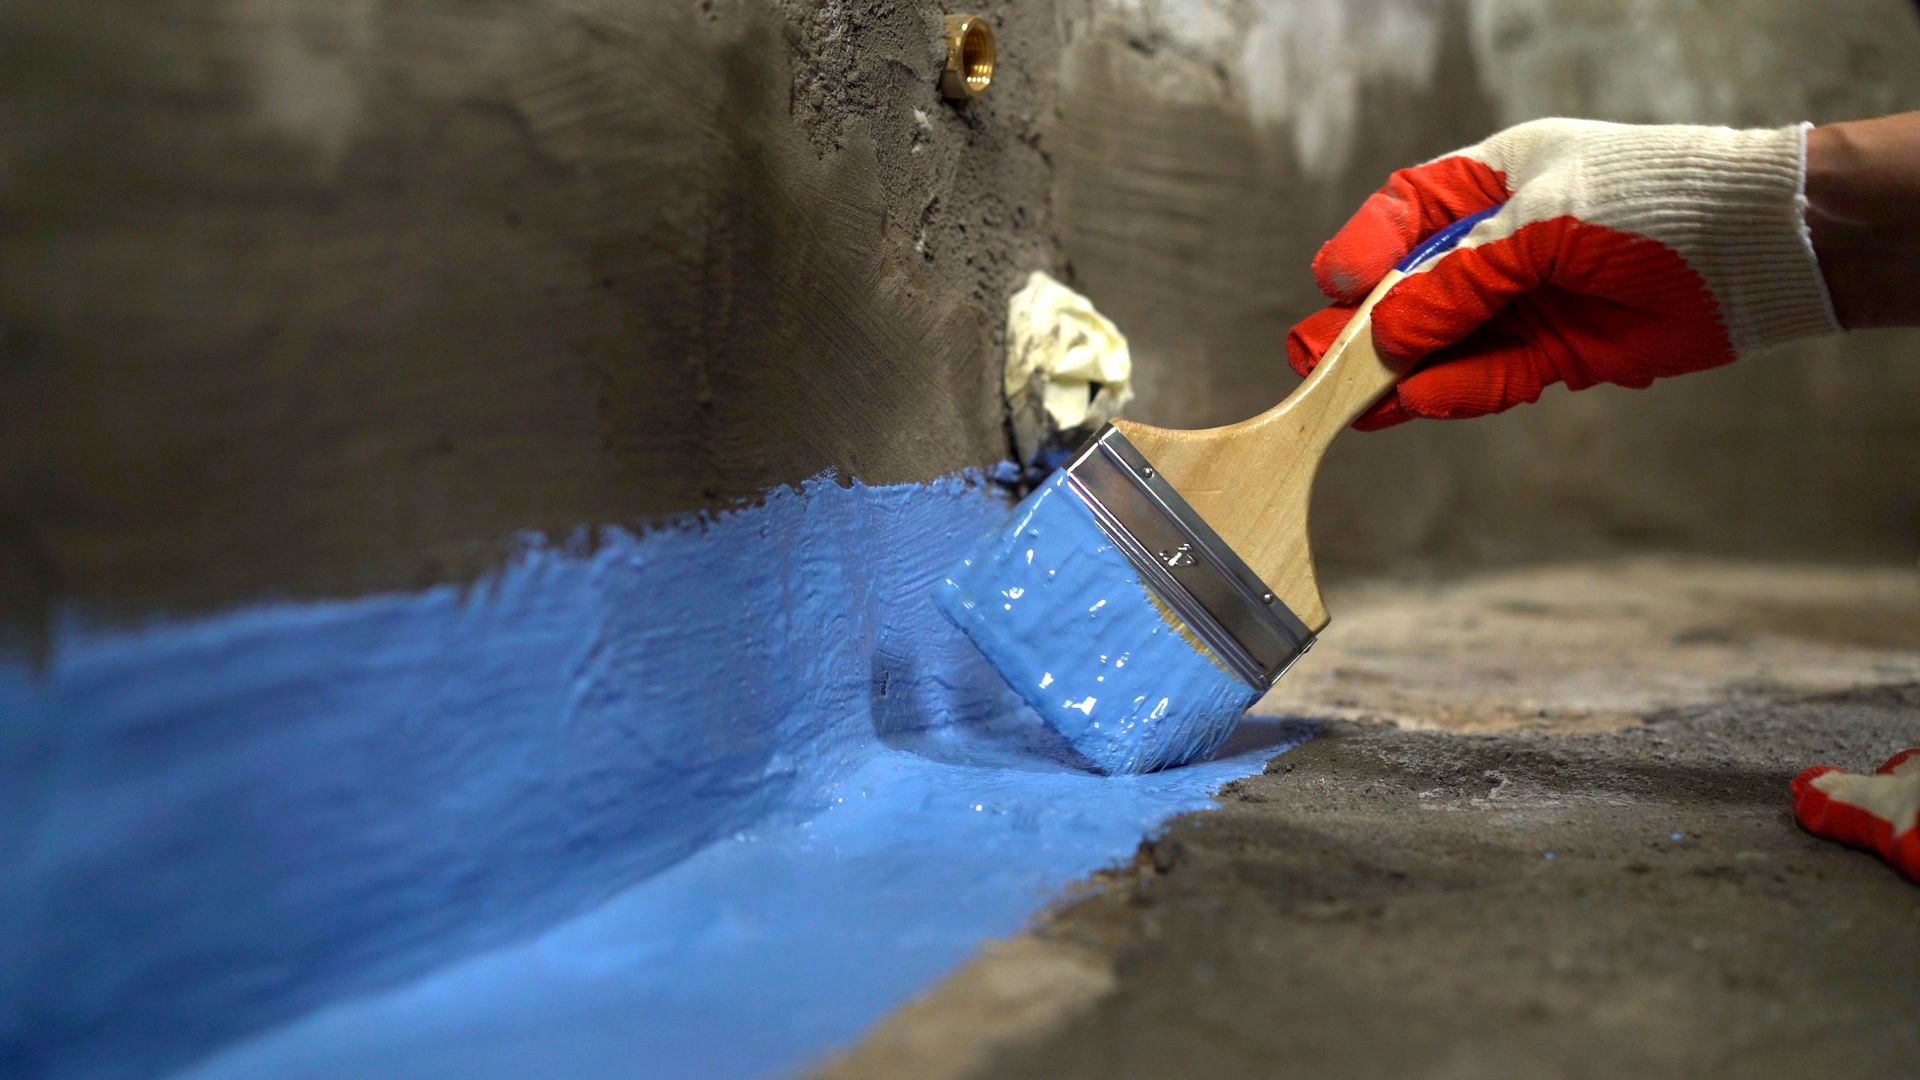 Waterproofing services - South Bend, IN - A&M Home Services